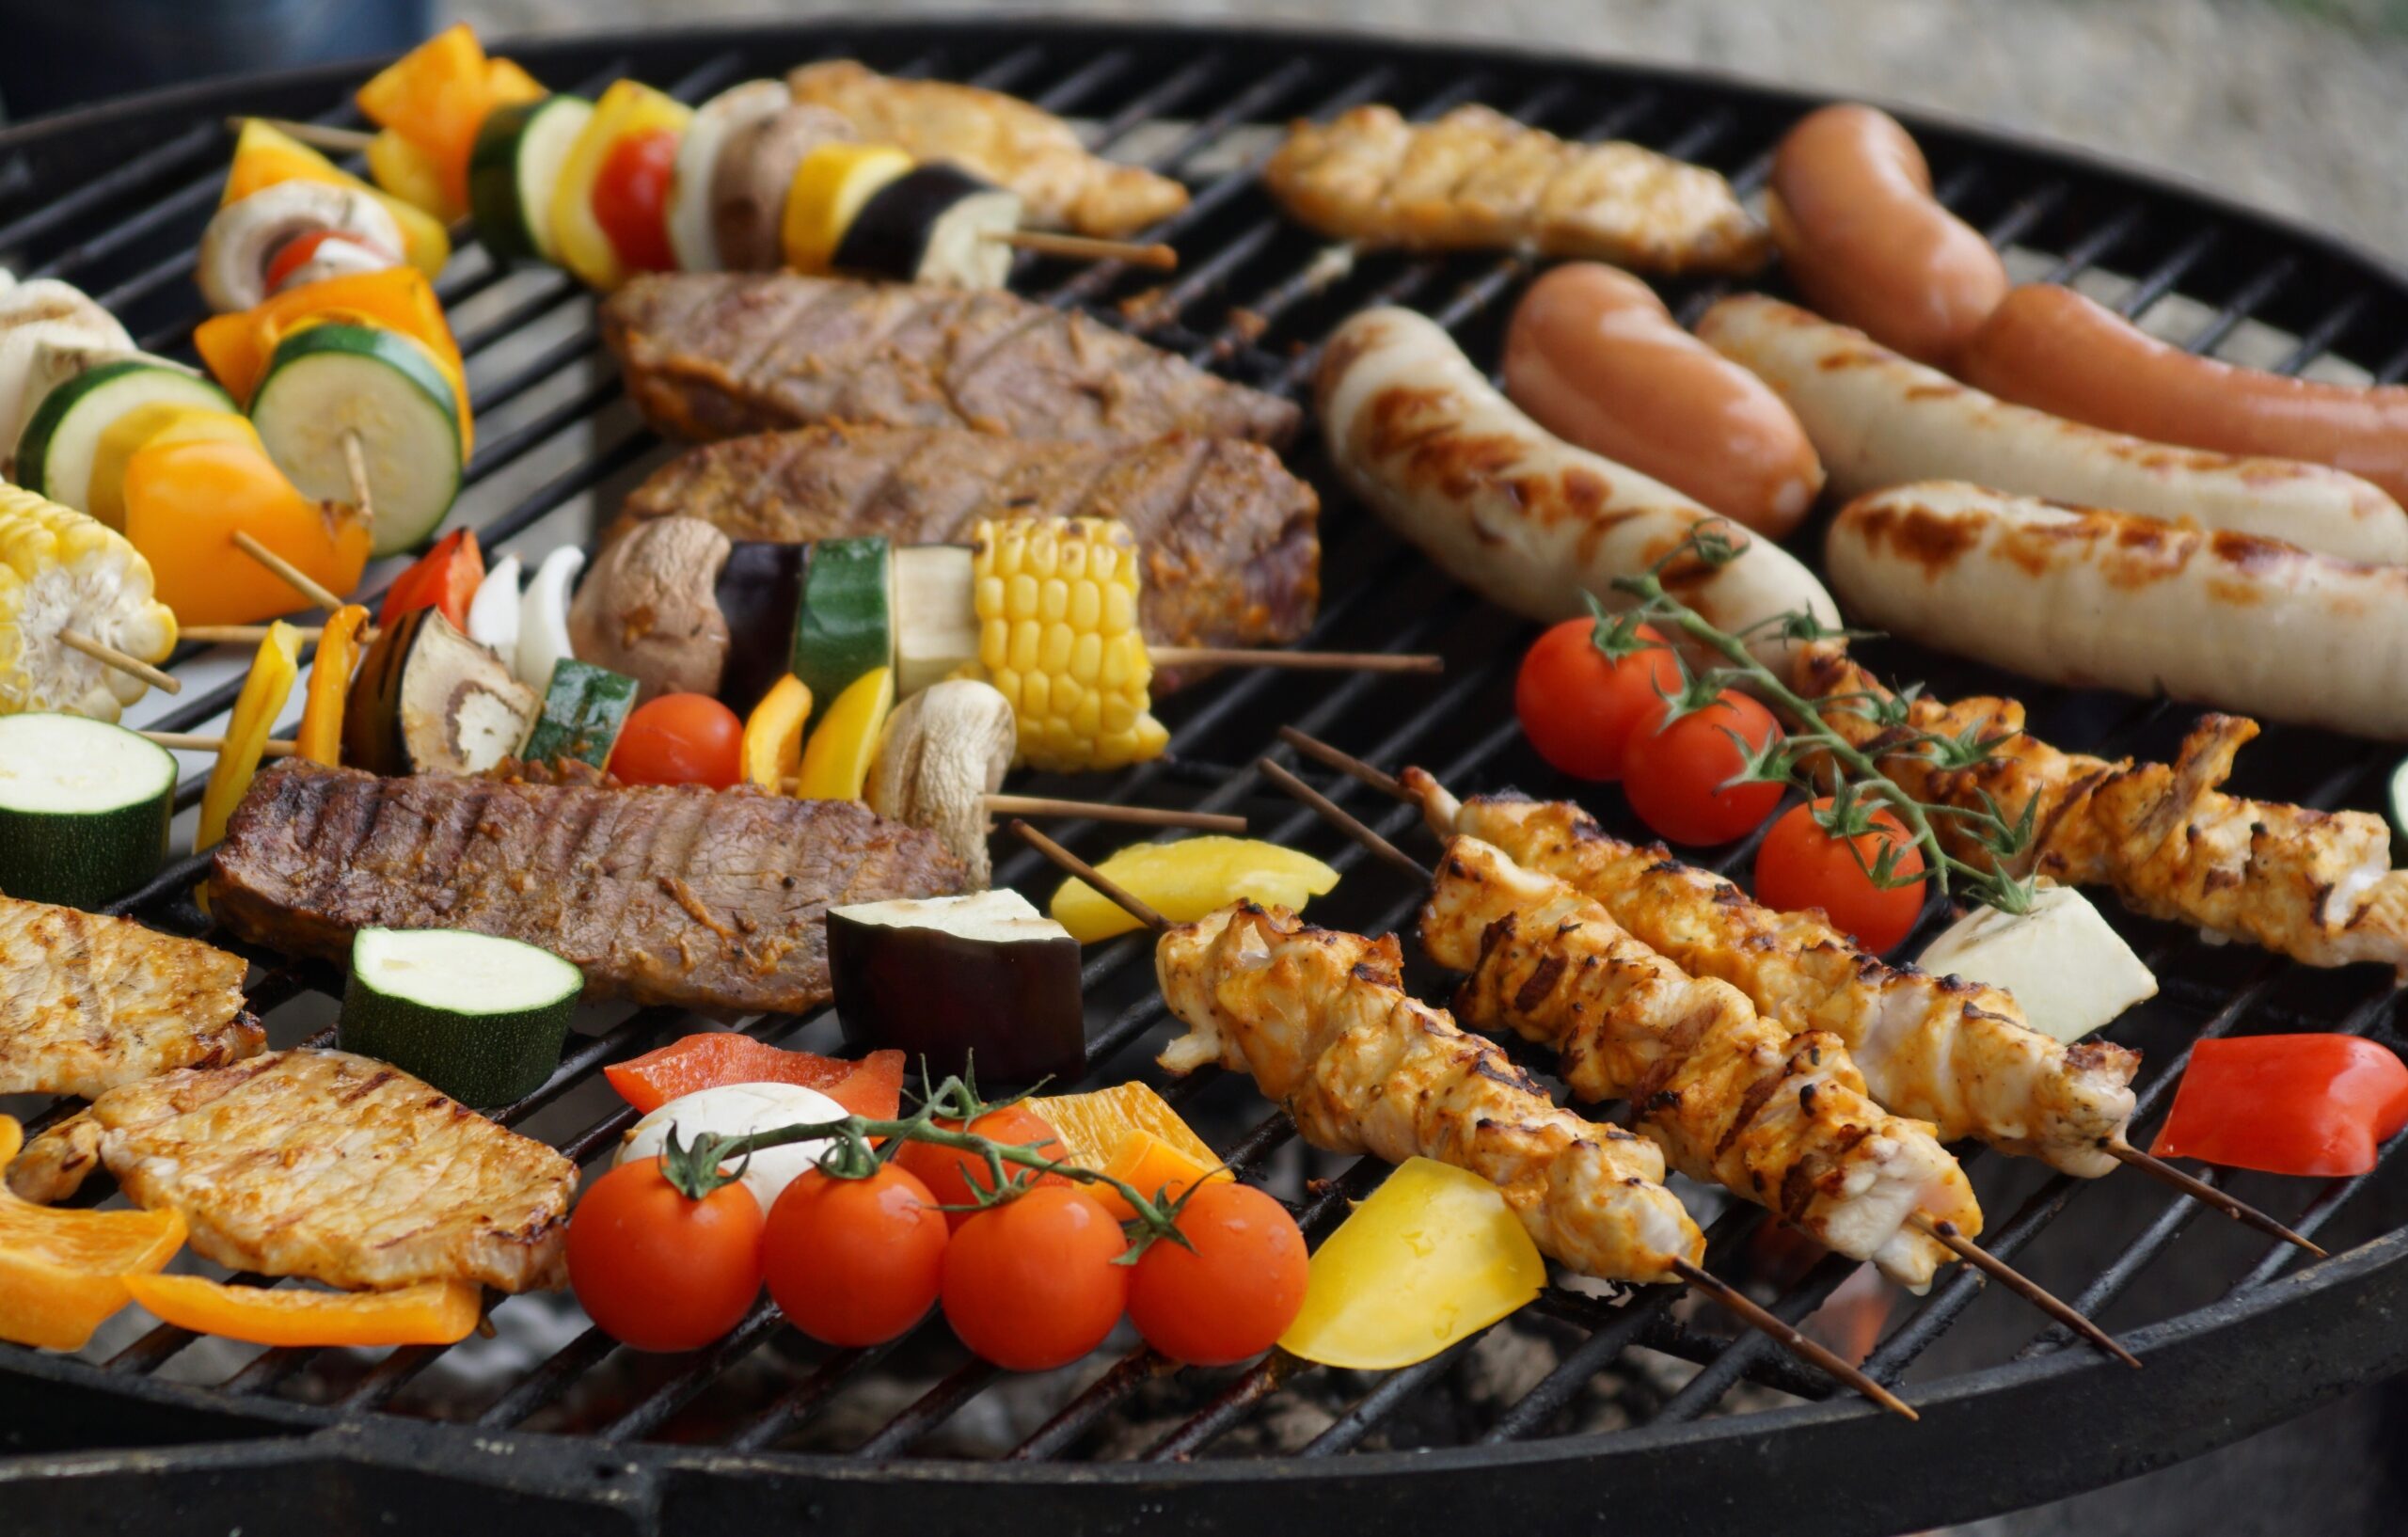 Grilling Like A Pro: Tips For Perfect BBQ